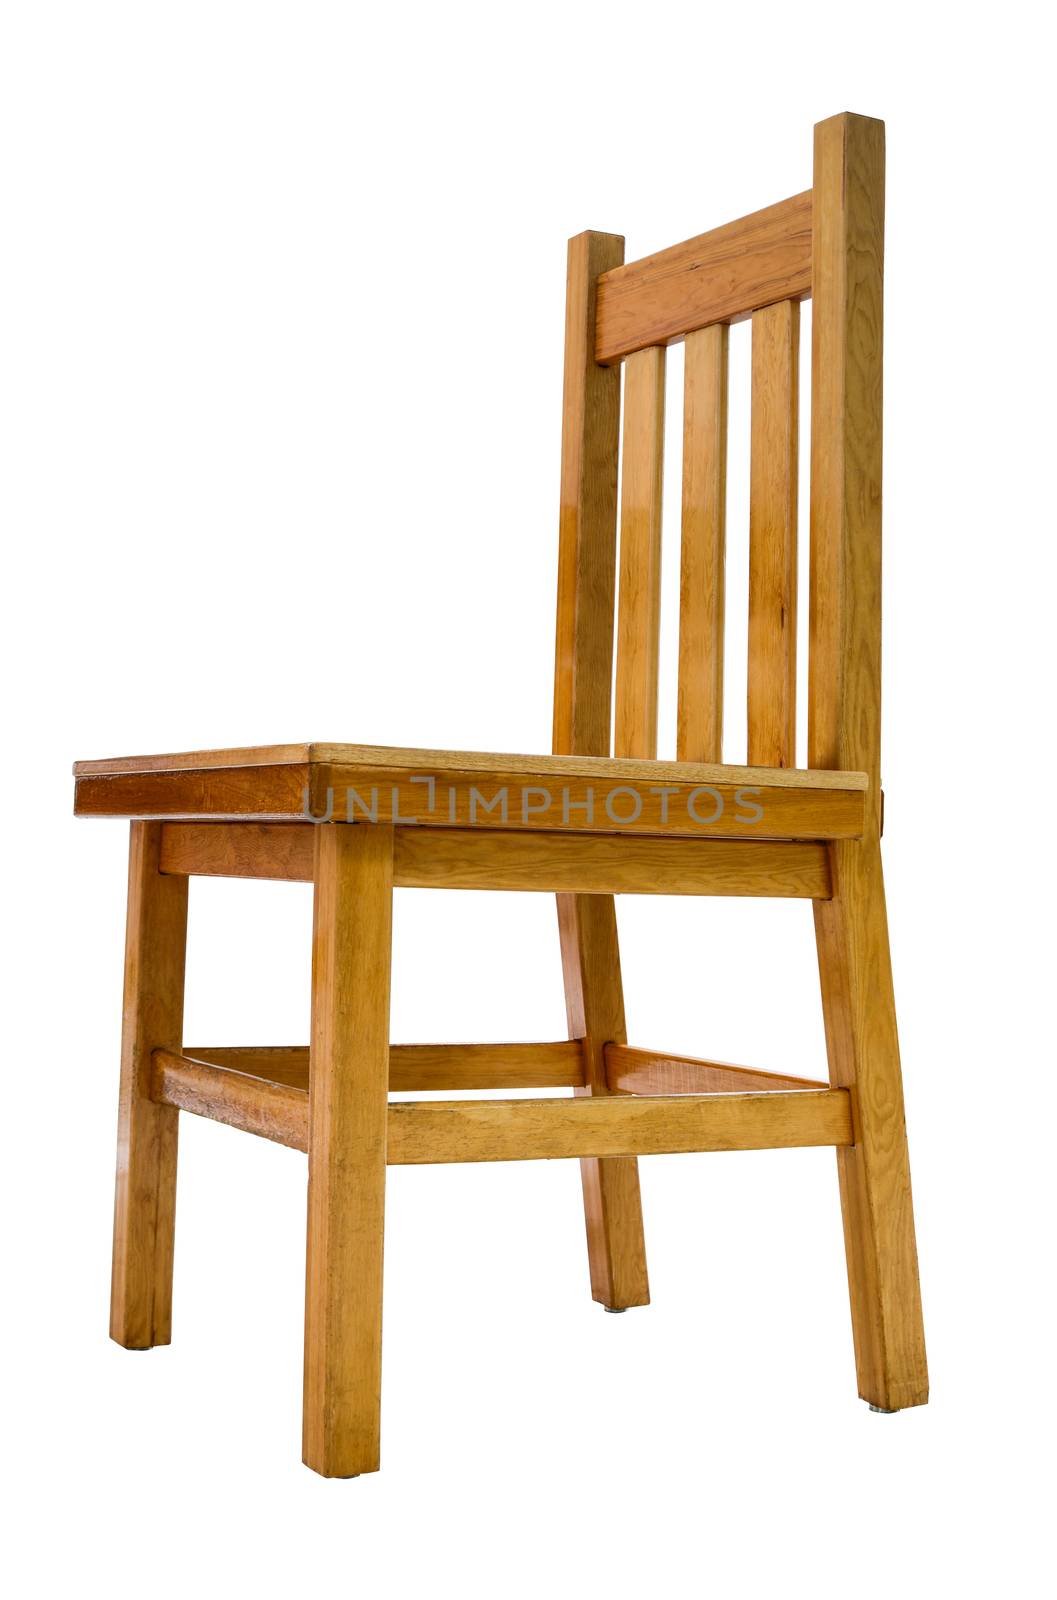 Isolated Image Of A Simple Kitchen Wooden Pine Chair